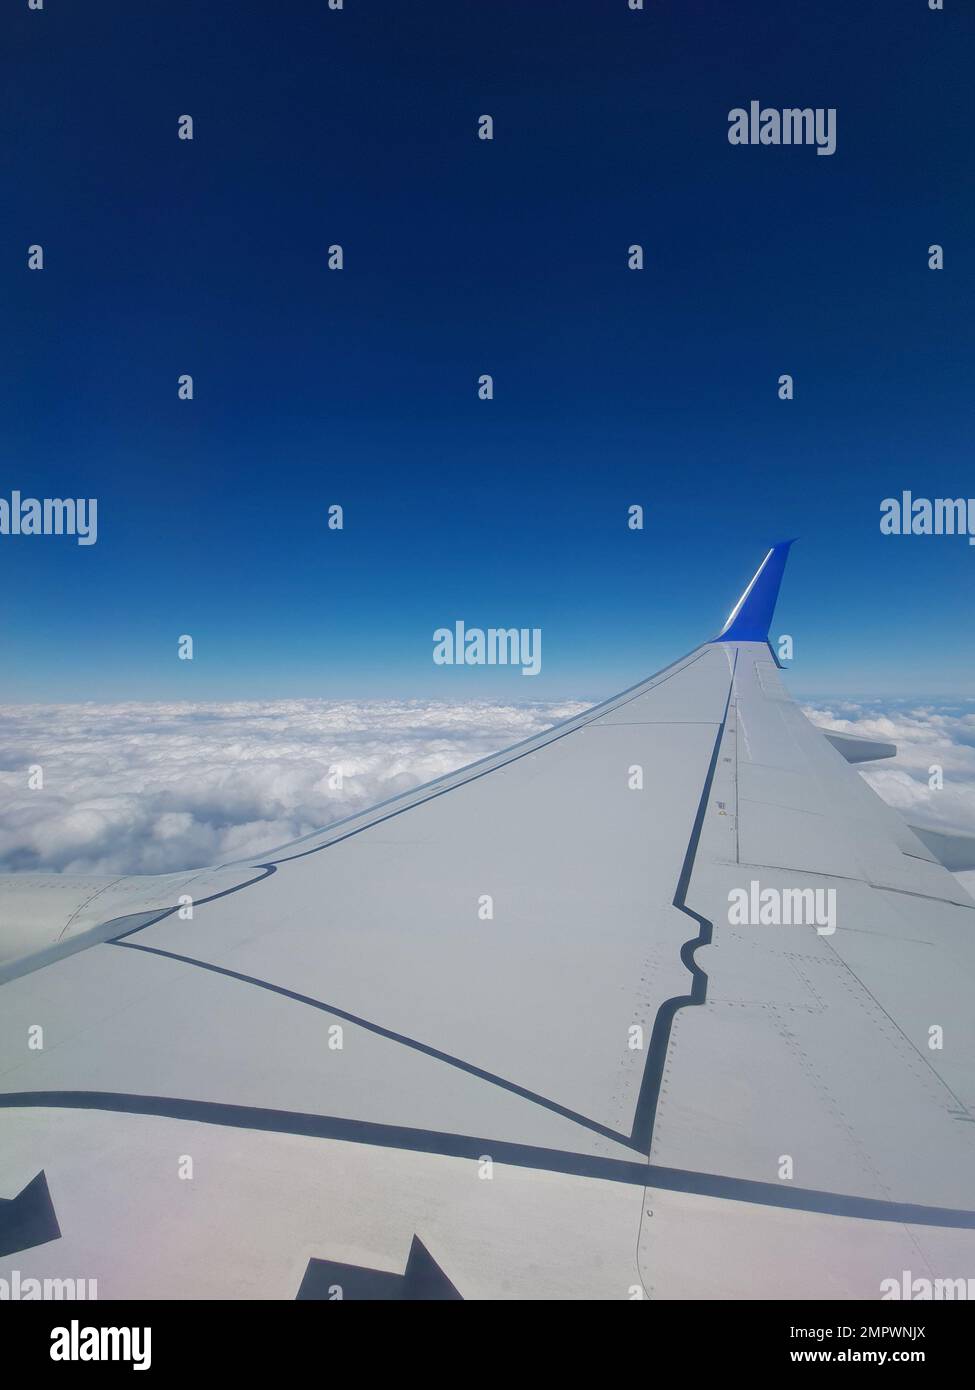 Travel on airplane theme. Jet wing over clouds in blue sky background Stock Photo